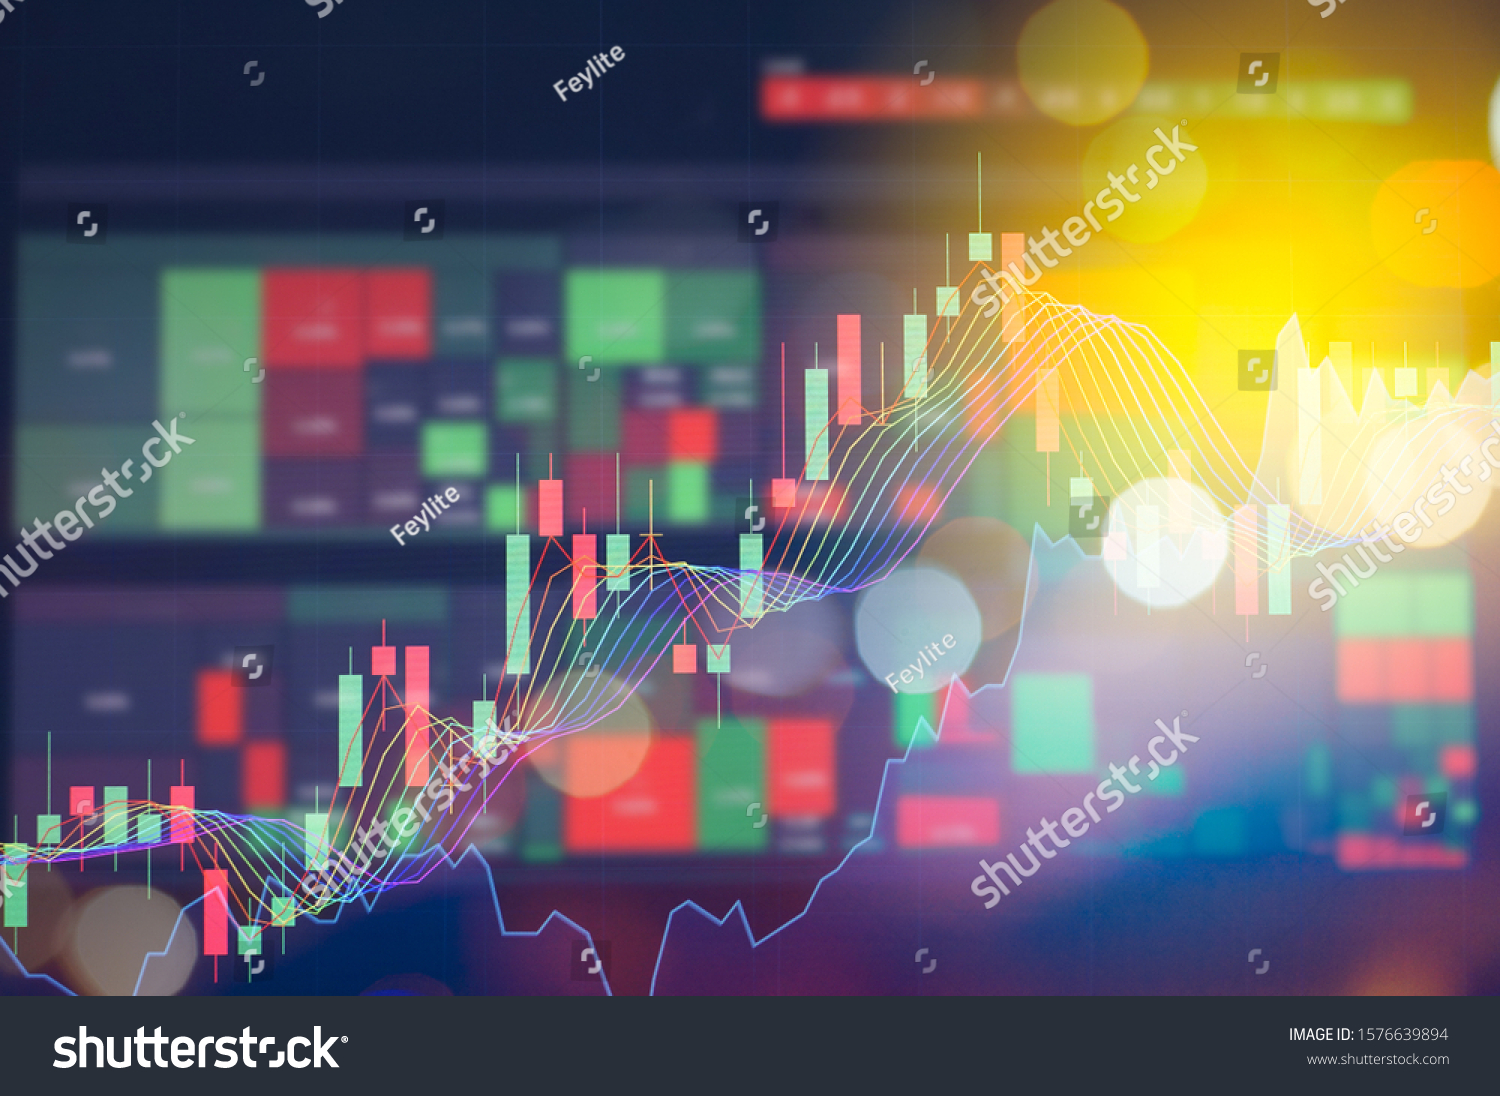 Stock market digital graph chart on LED display concept. A large display of daily stock market price and quotation. Indicator financial forex trade education background. #1576639894